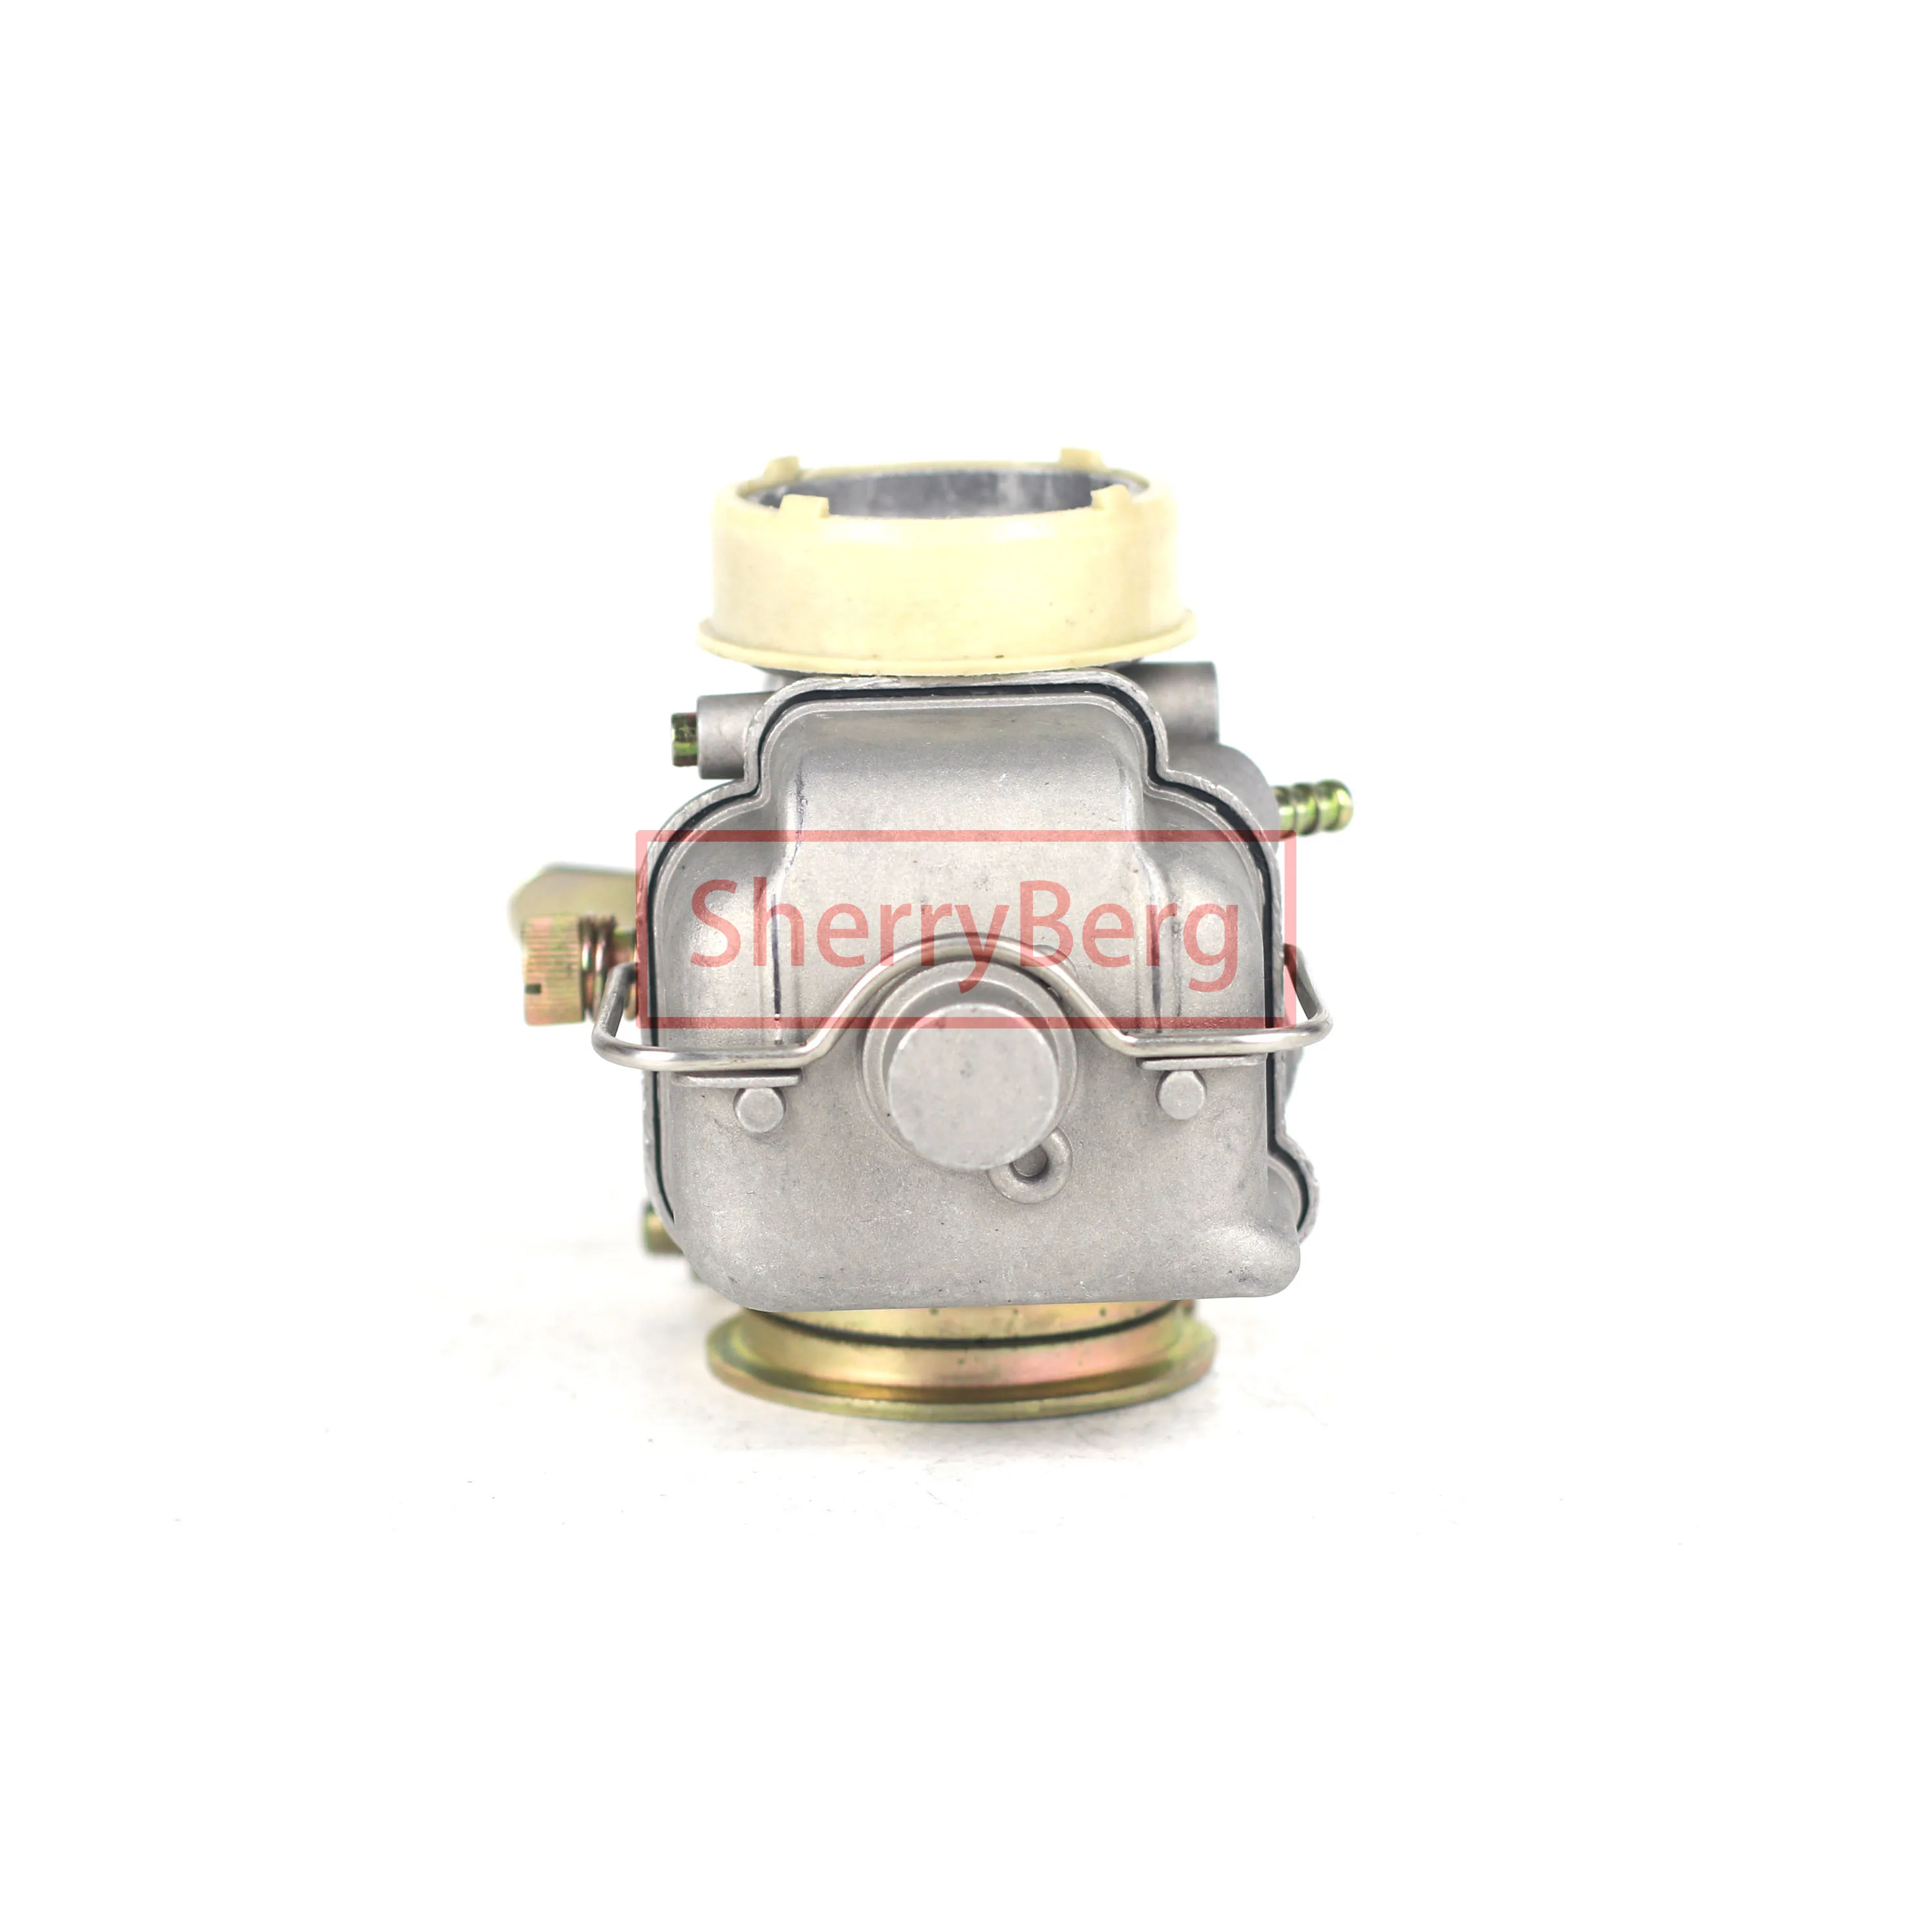 

SherryBerg FREE SHIPPING replace carburettor carb Bing 84 carburetor carb for KS MZ TS250 PUCH K125,250,350 vergaser bing84